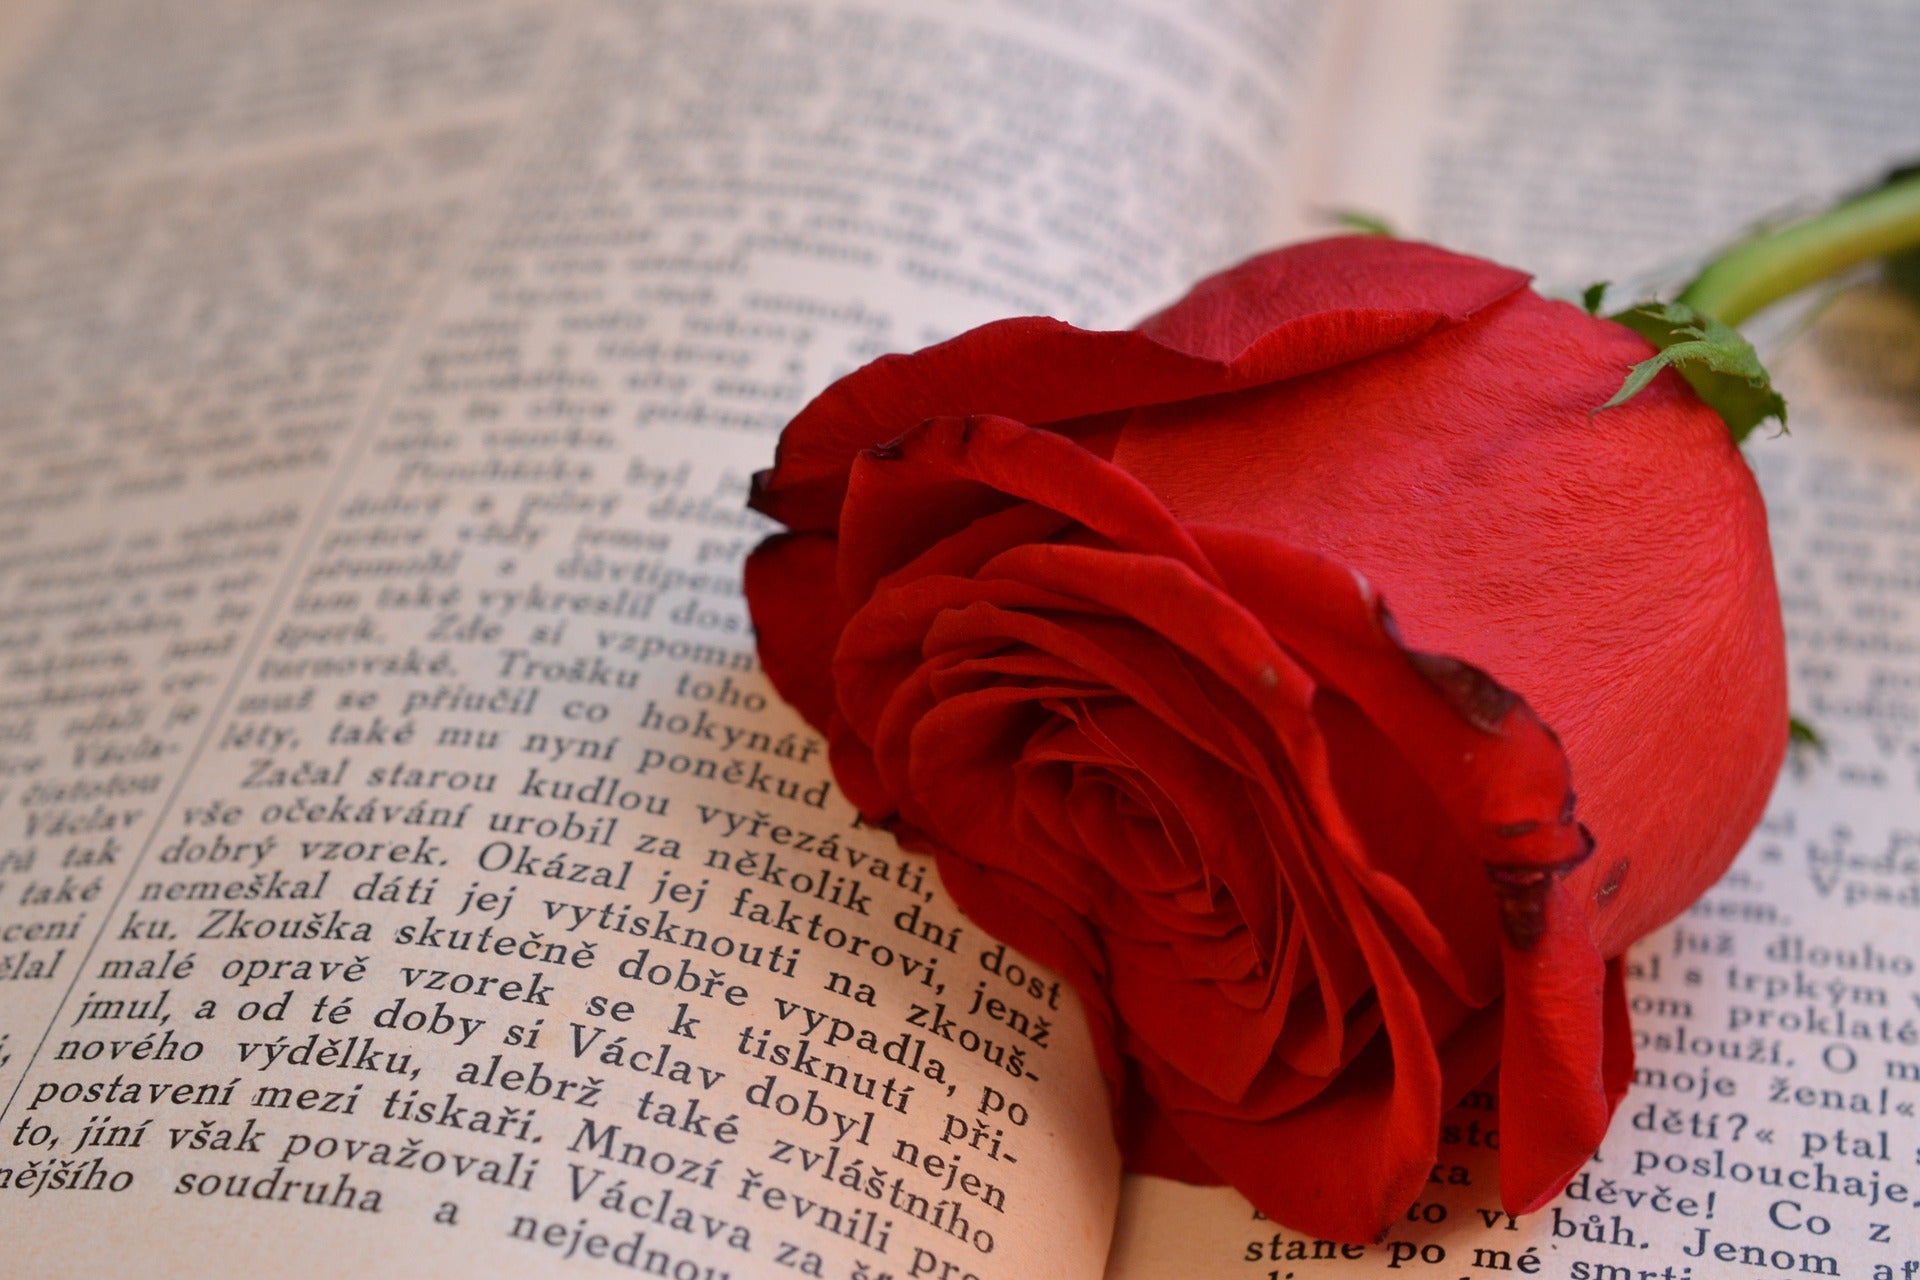 Red rose placed on the text of a book